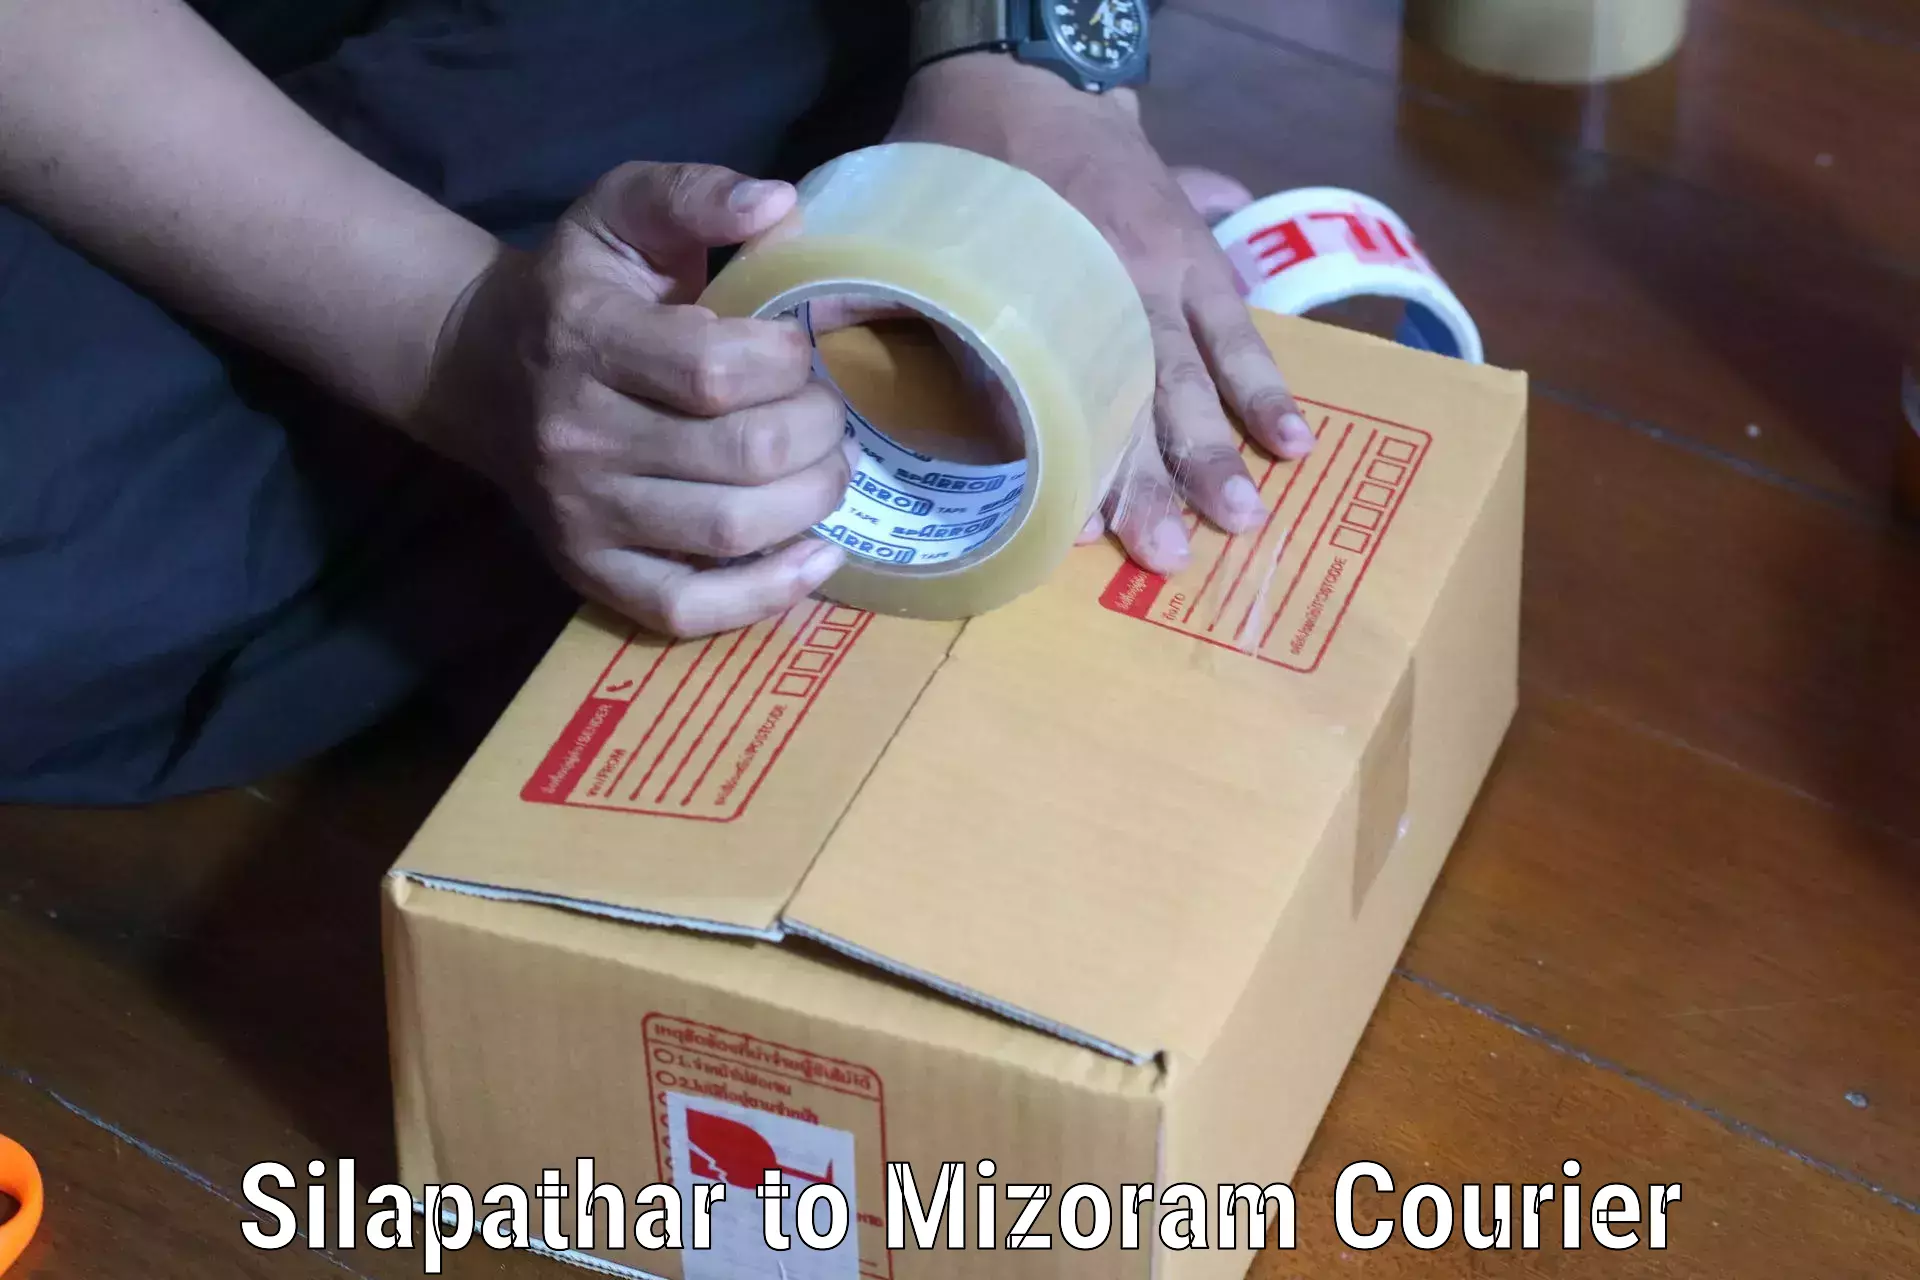 Sustainable courier practices in Silapathar to Siaha